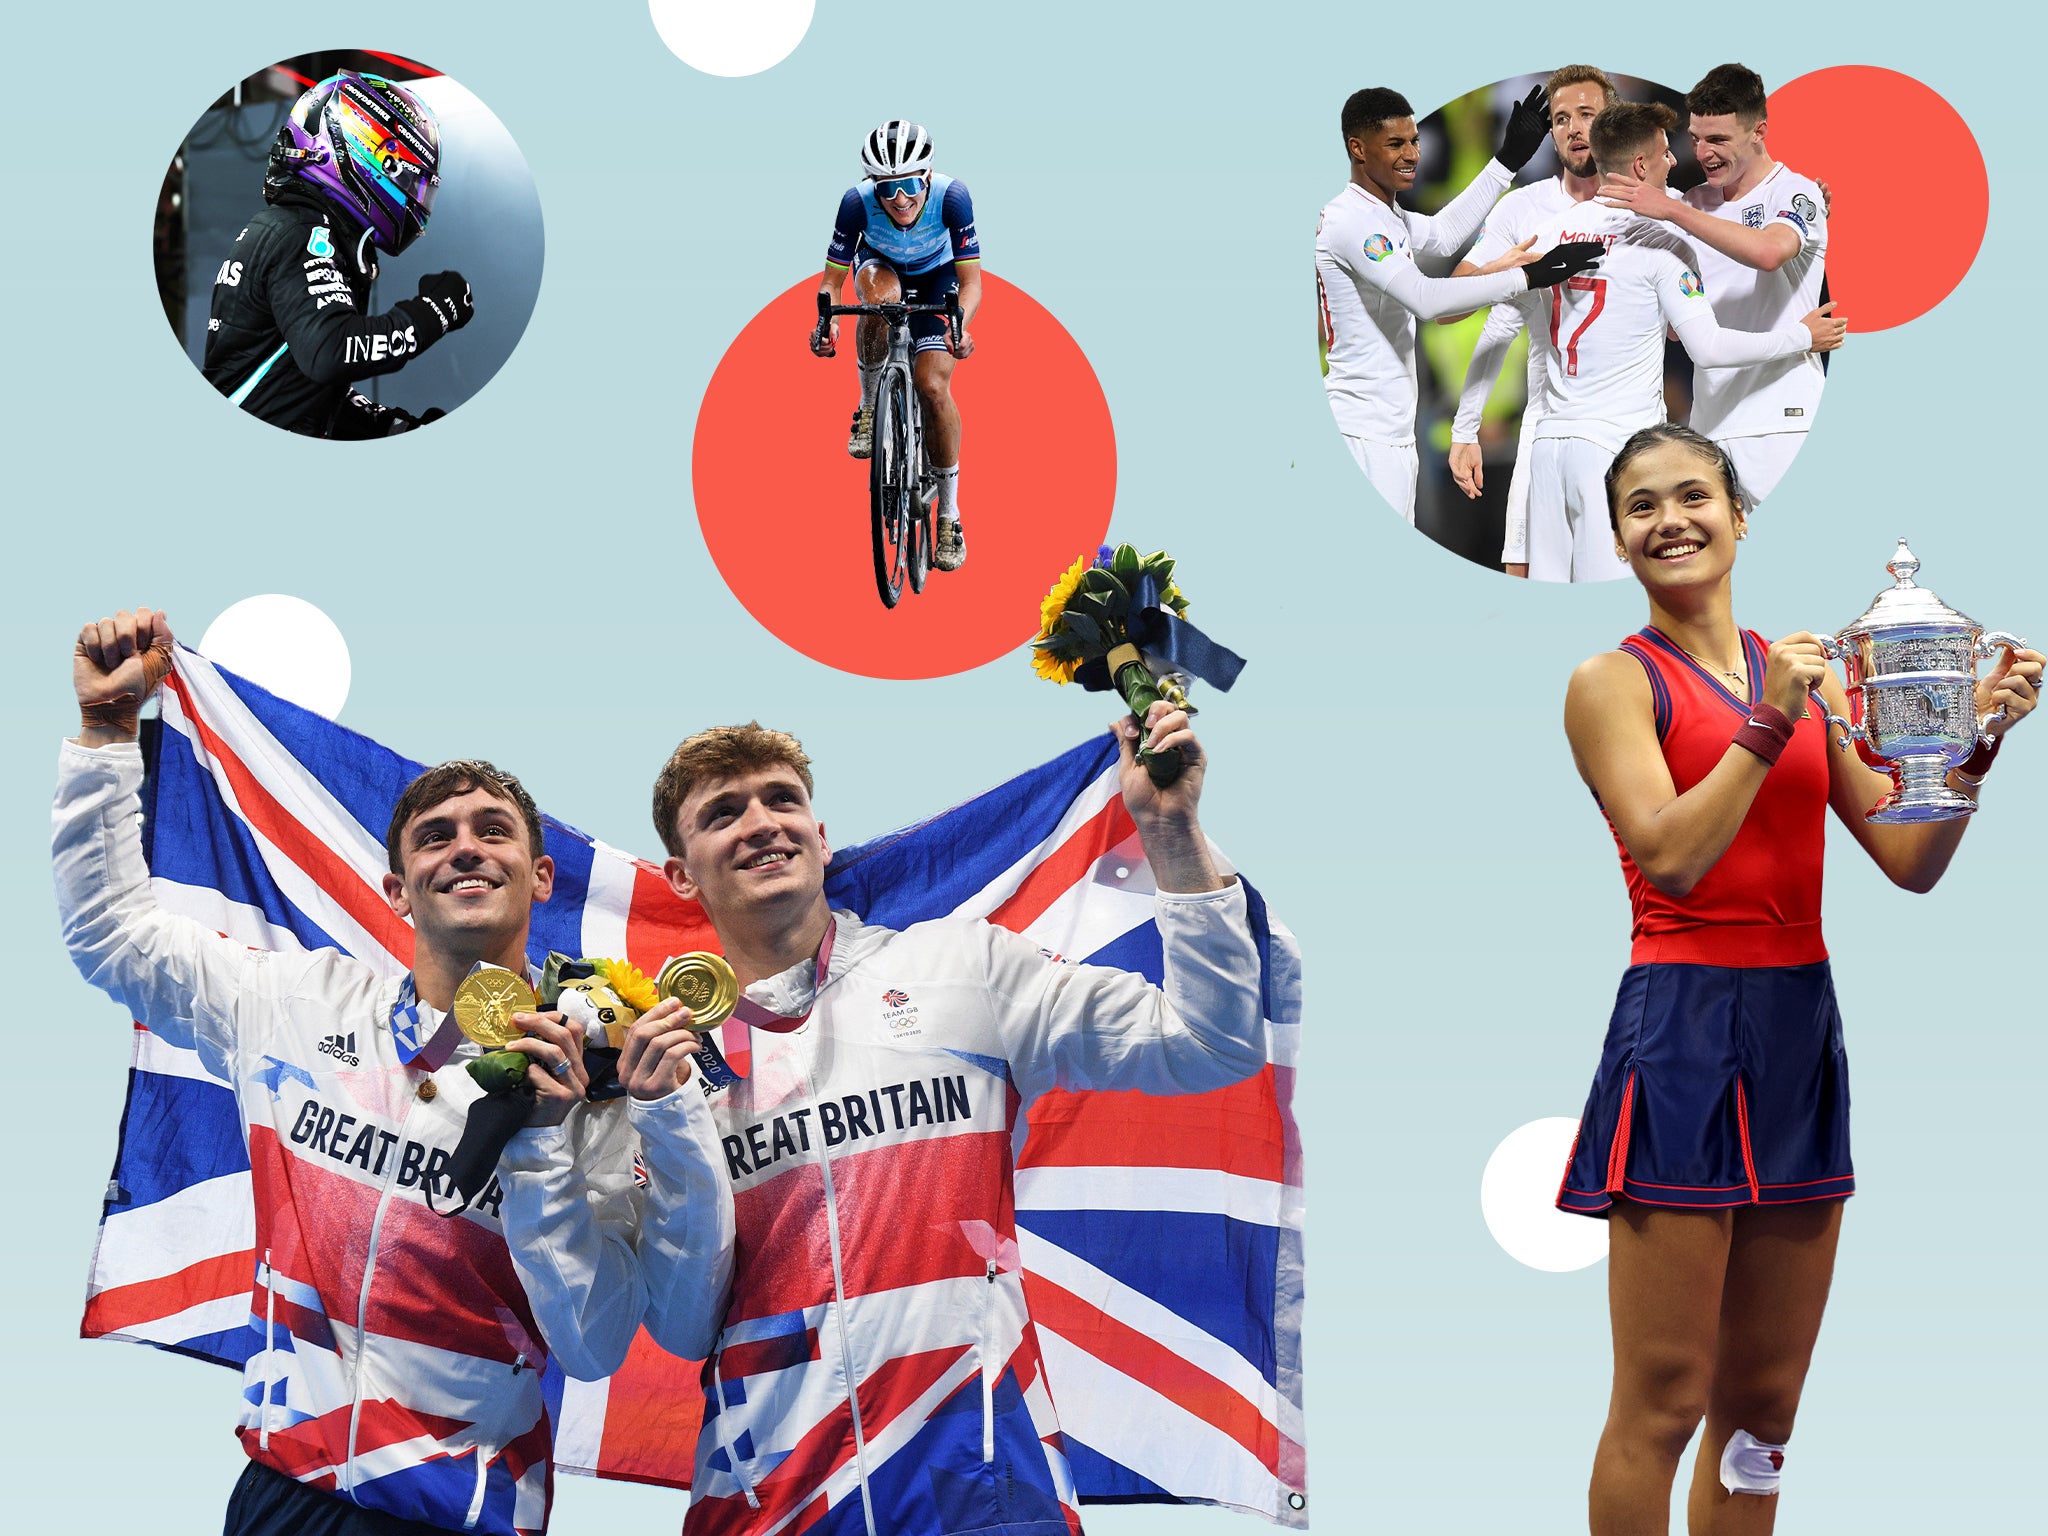 Joy and inspiration: (clockwise from top left) Lewis Hamilton, Lizzie Deignan, the England football team, Emma Raducanu, and Tom Daley and Matty Lee